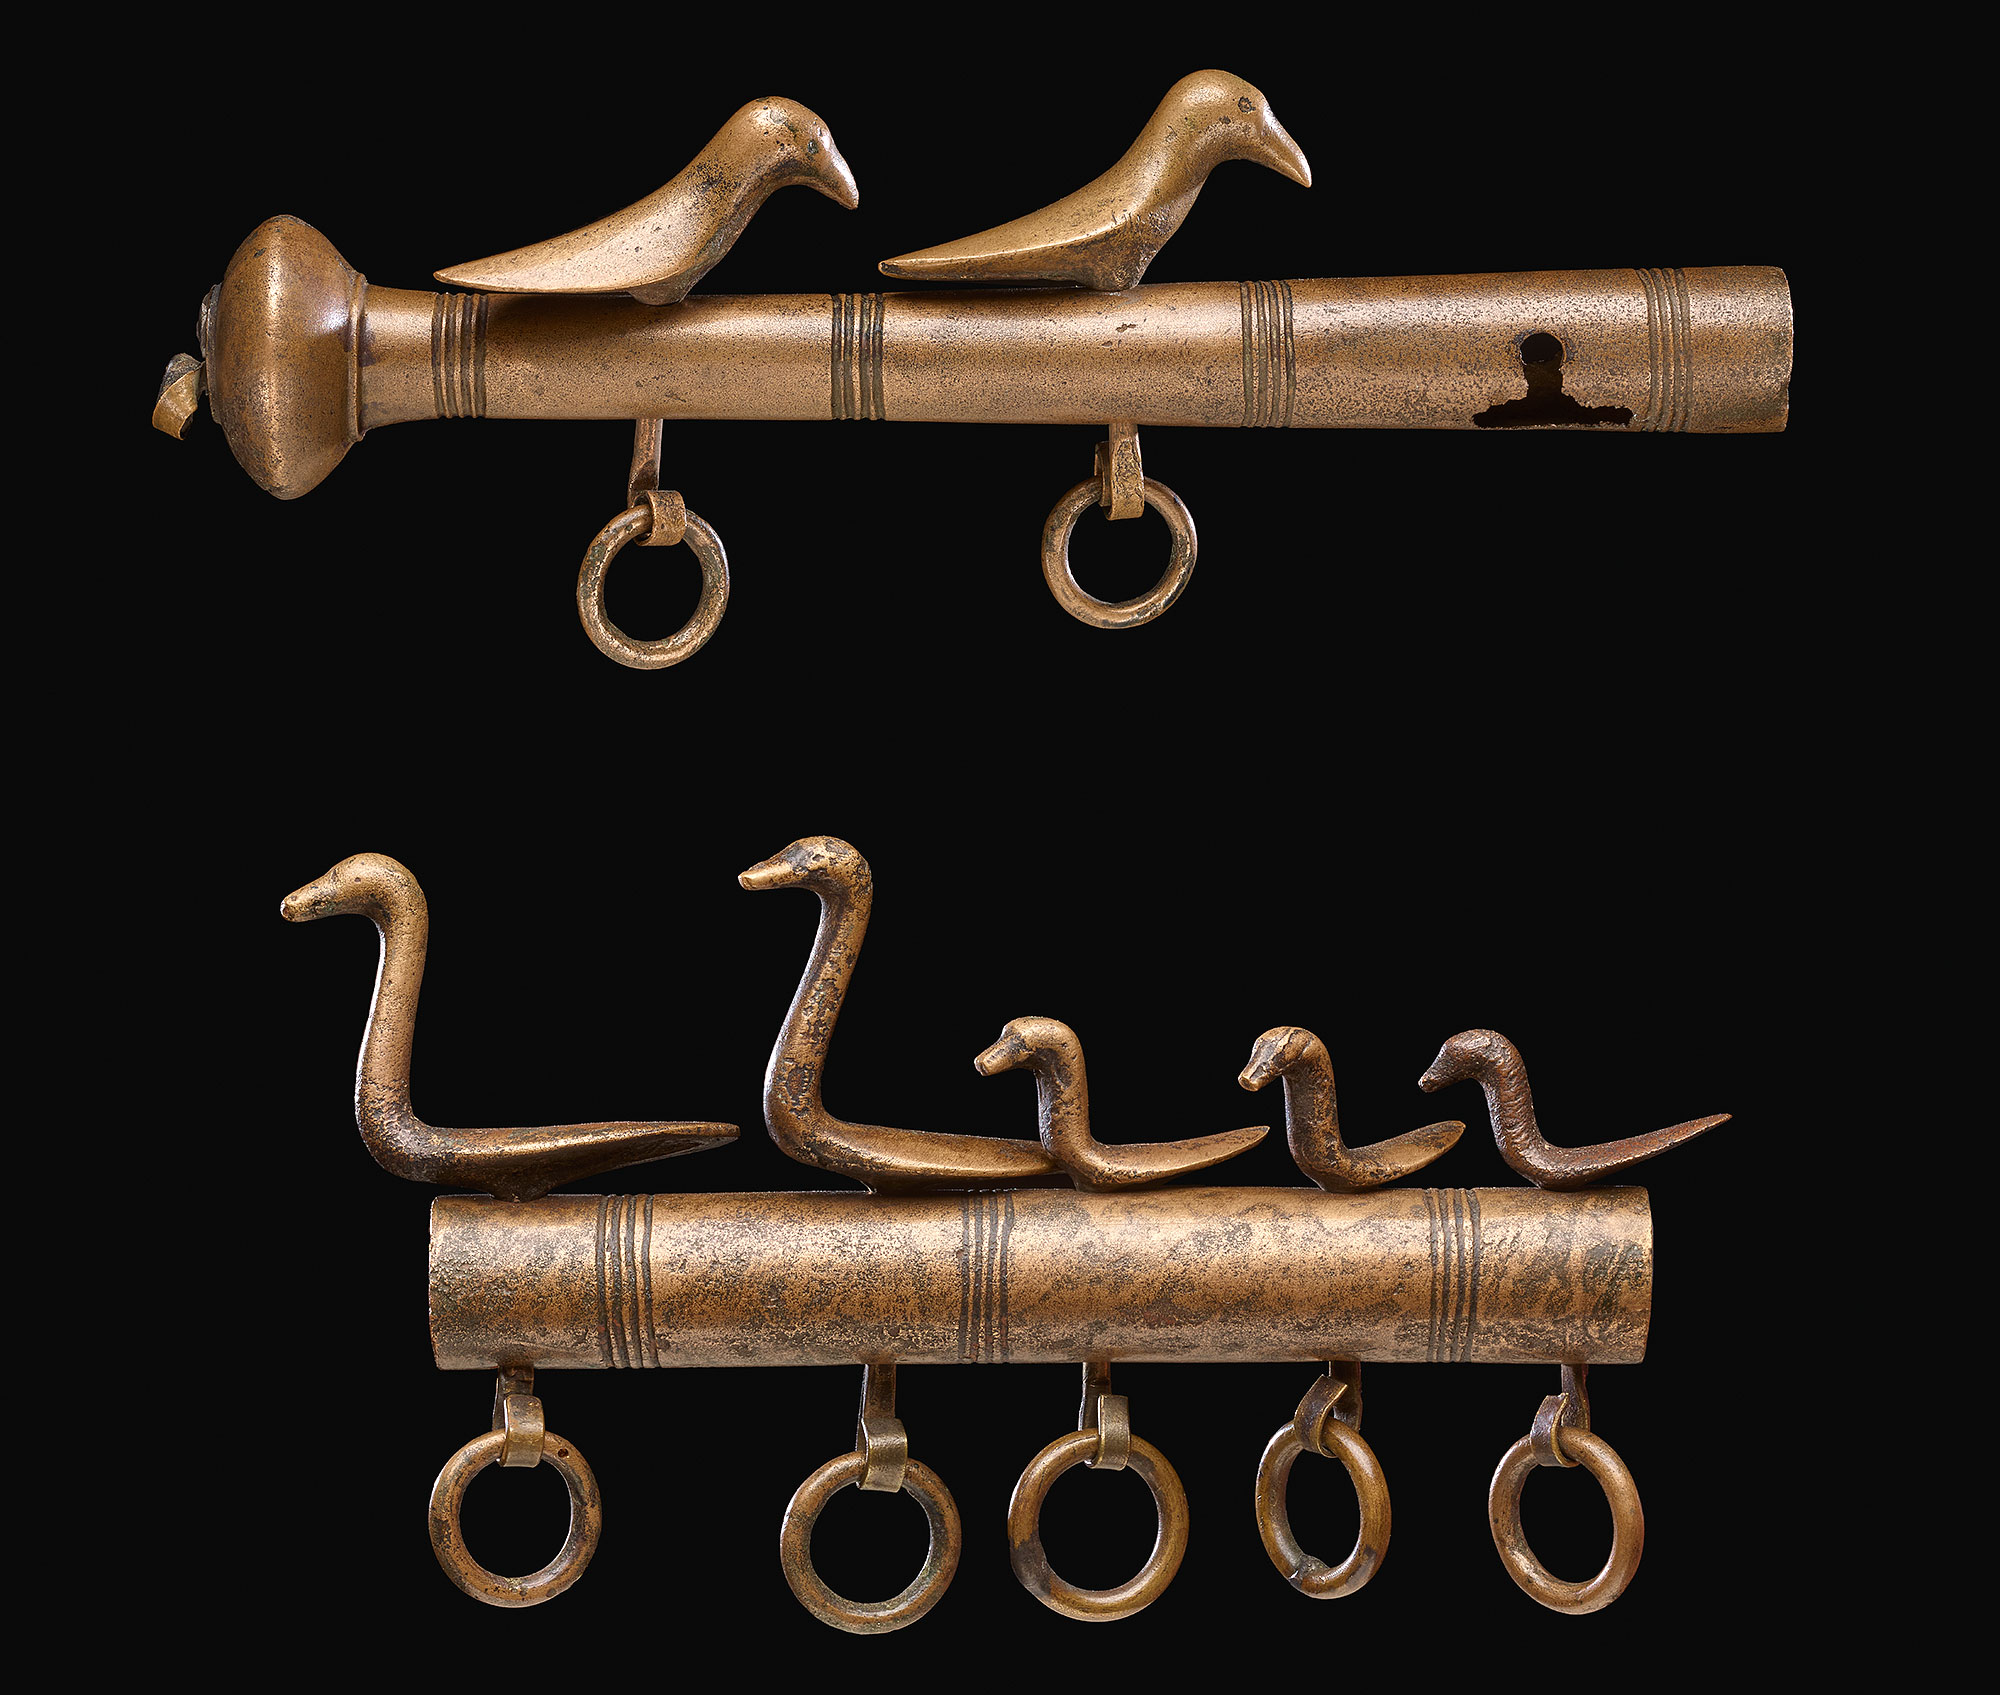 The birds on the Dunaverney flesh-hook, which dates from about 1100–800 BC.  They are some of the earliest objects known to have been made using a lost-wax process, when molten metal is poured into a wax mould